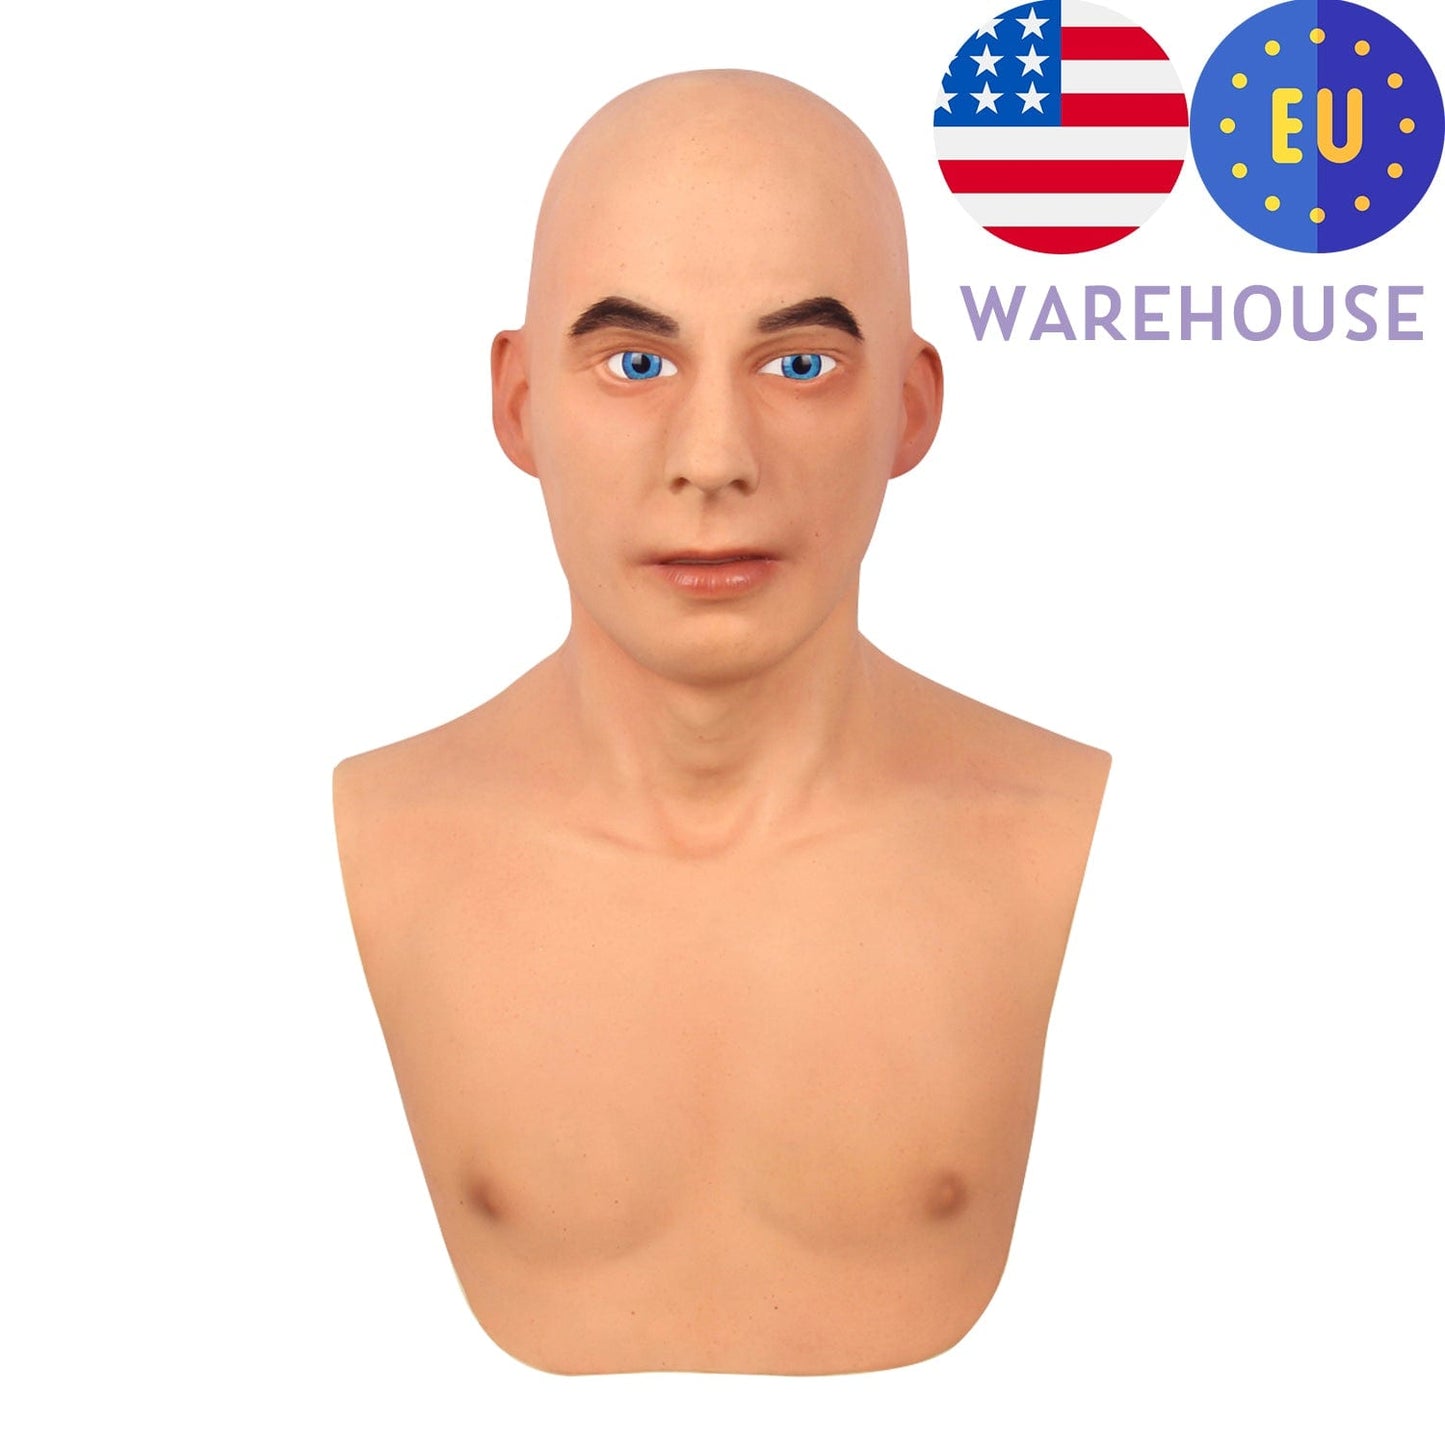 Hans Youth Male Silicone Mask